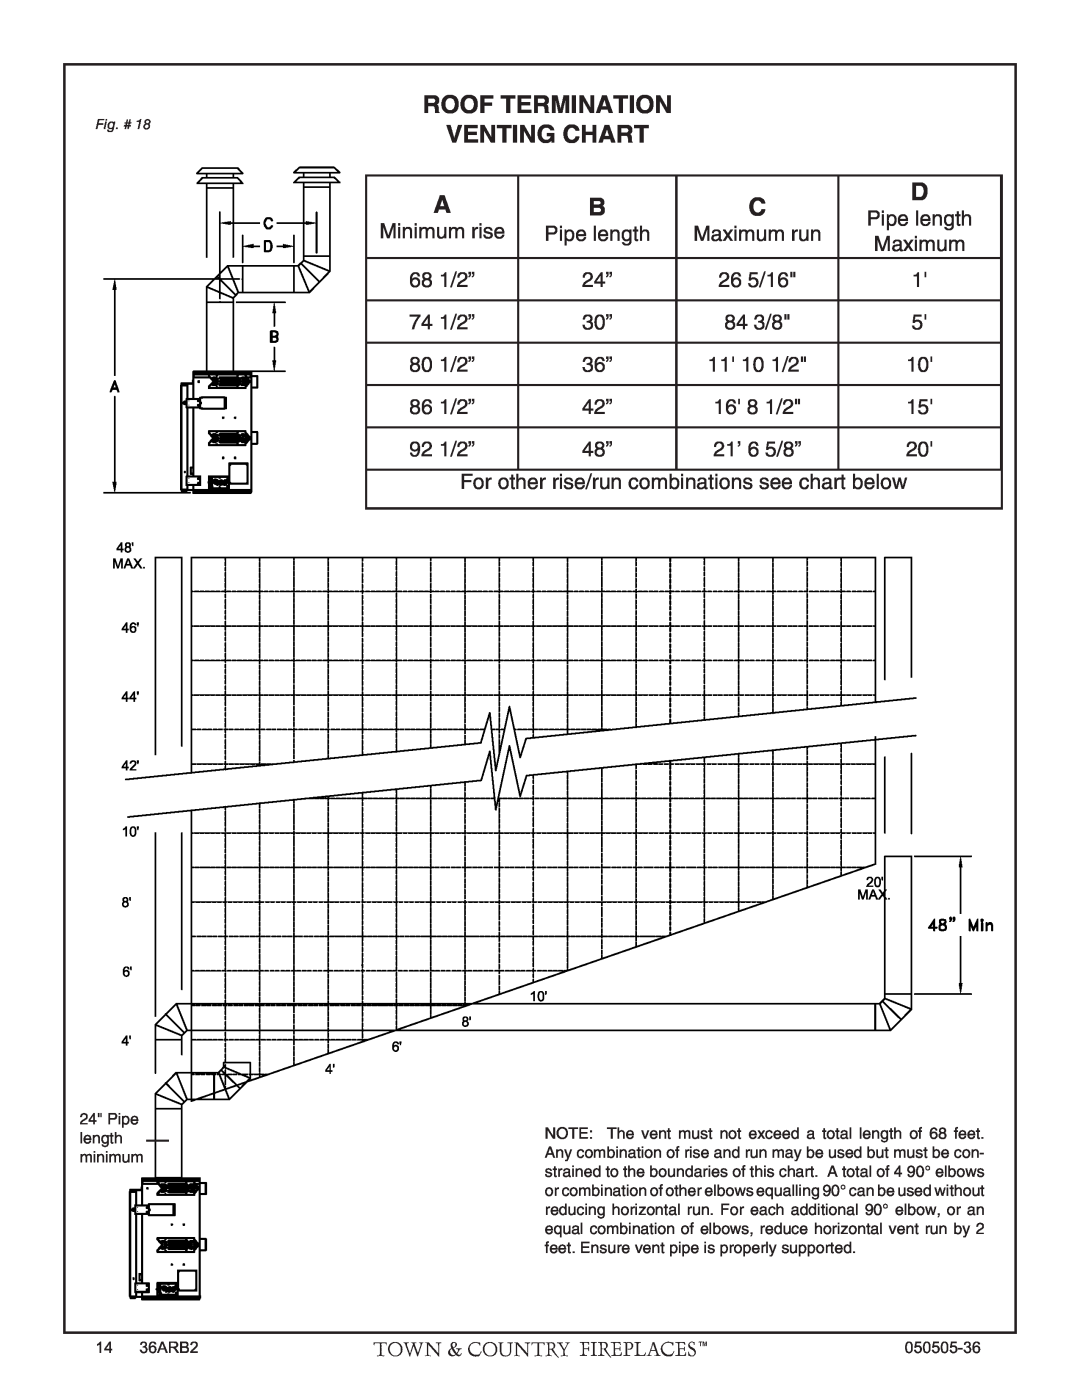 PGS TC36 AR manual Roof Termination, Venting Chart 